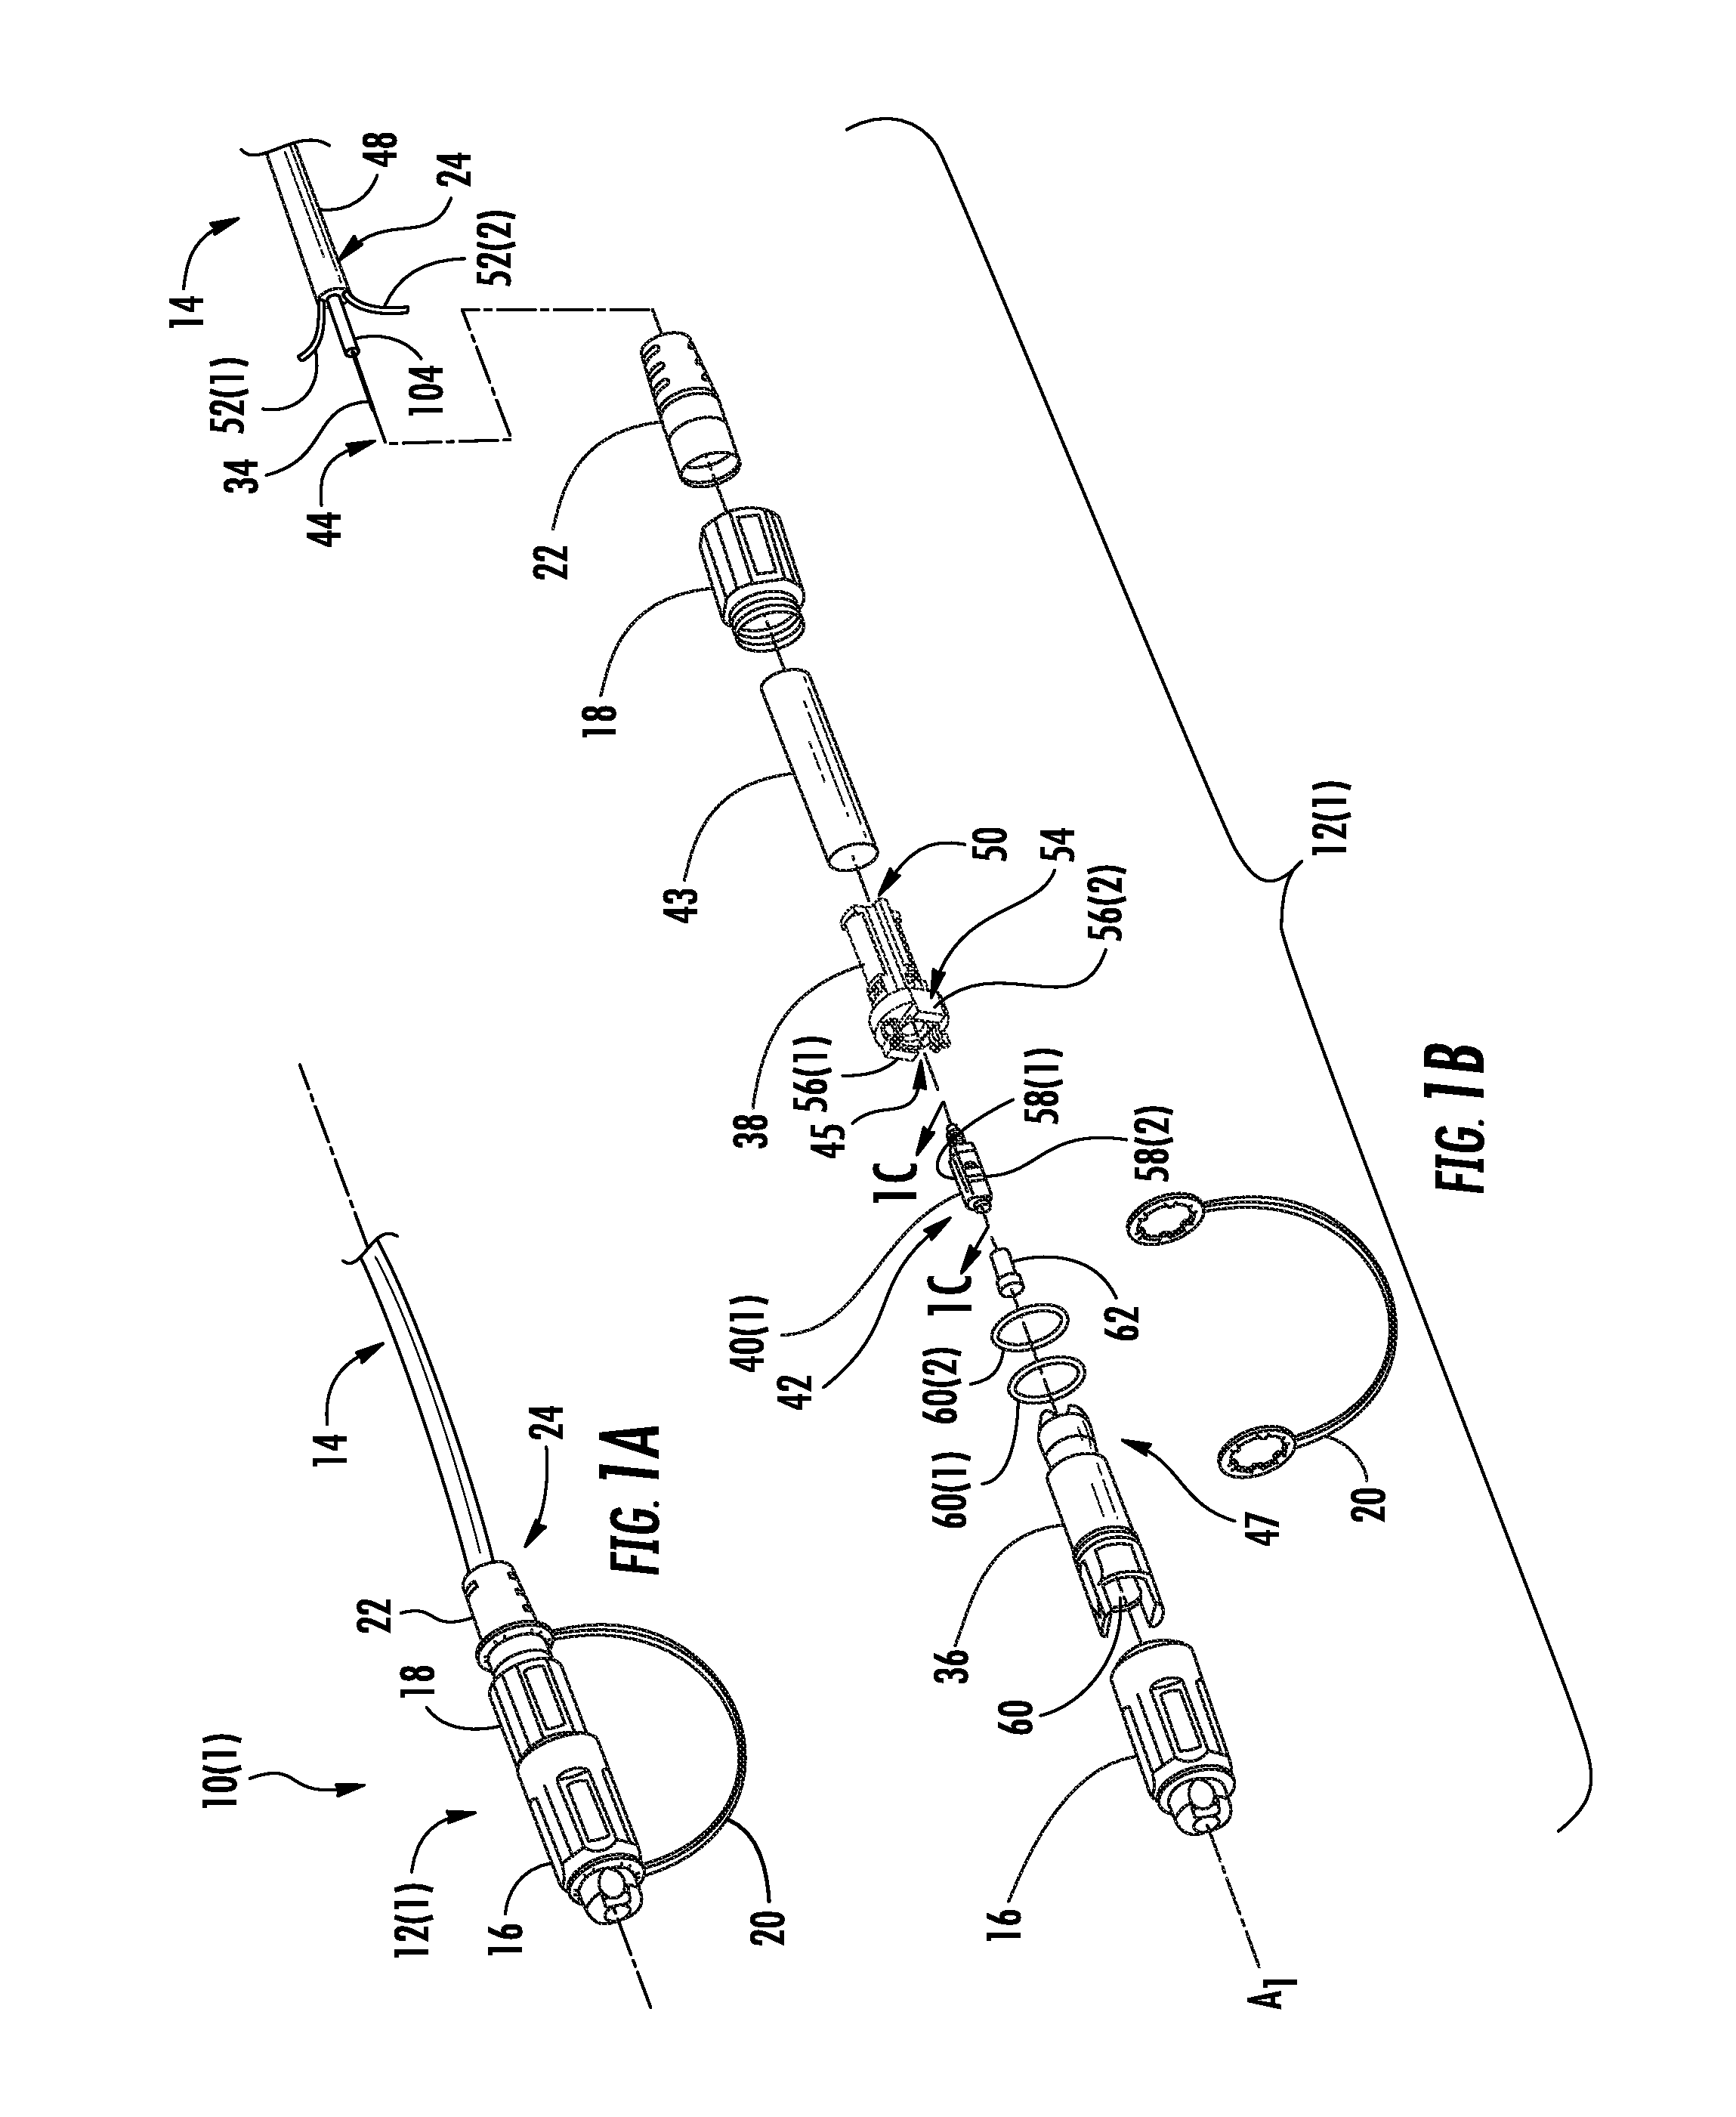 Ferrule holders with an integral lead-in tube employed in fiber optic connector assemblies, and related components, connectors, and methods